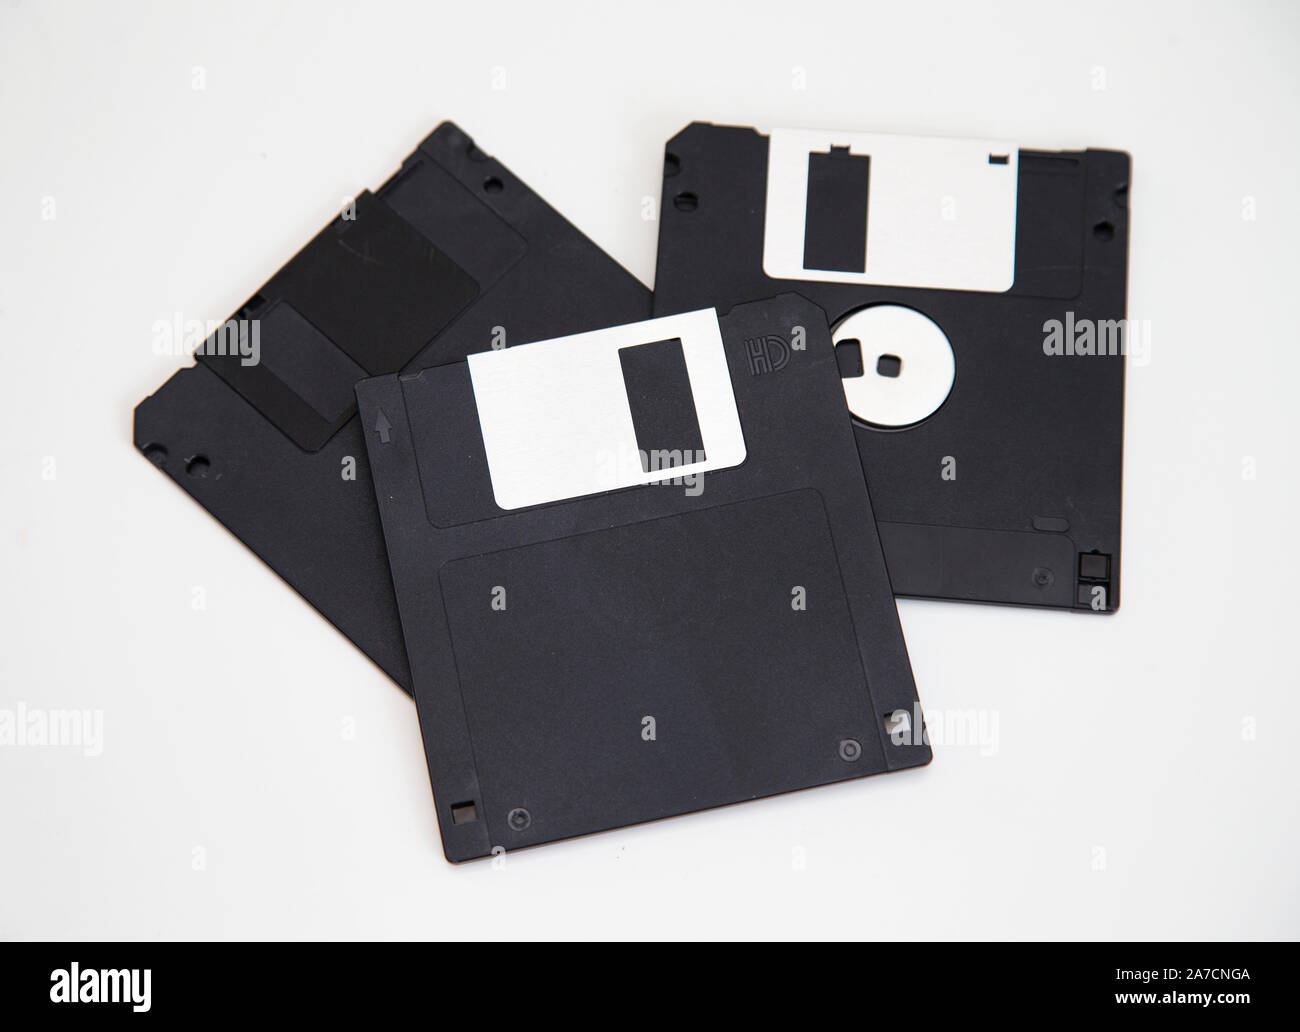 Diskettes for a computer. A floppy disk, also known as a floppy, diskette, or simply disk, is a type of disk storage composed of a disk of thin and flexible magnetic storage medium, sealed in a rectangular plastic enclosure lined with fabric that removes dust particles.Photo Jeppe Gustafsson Stock Photo